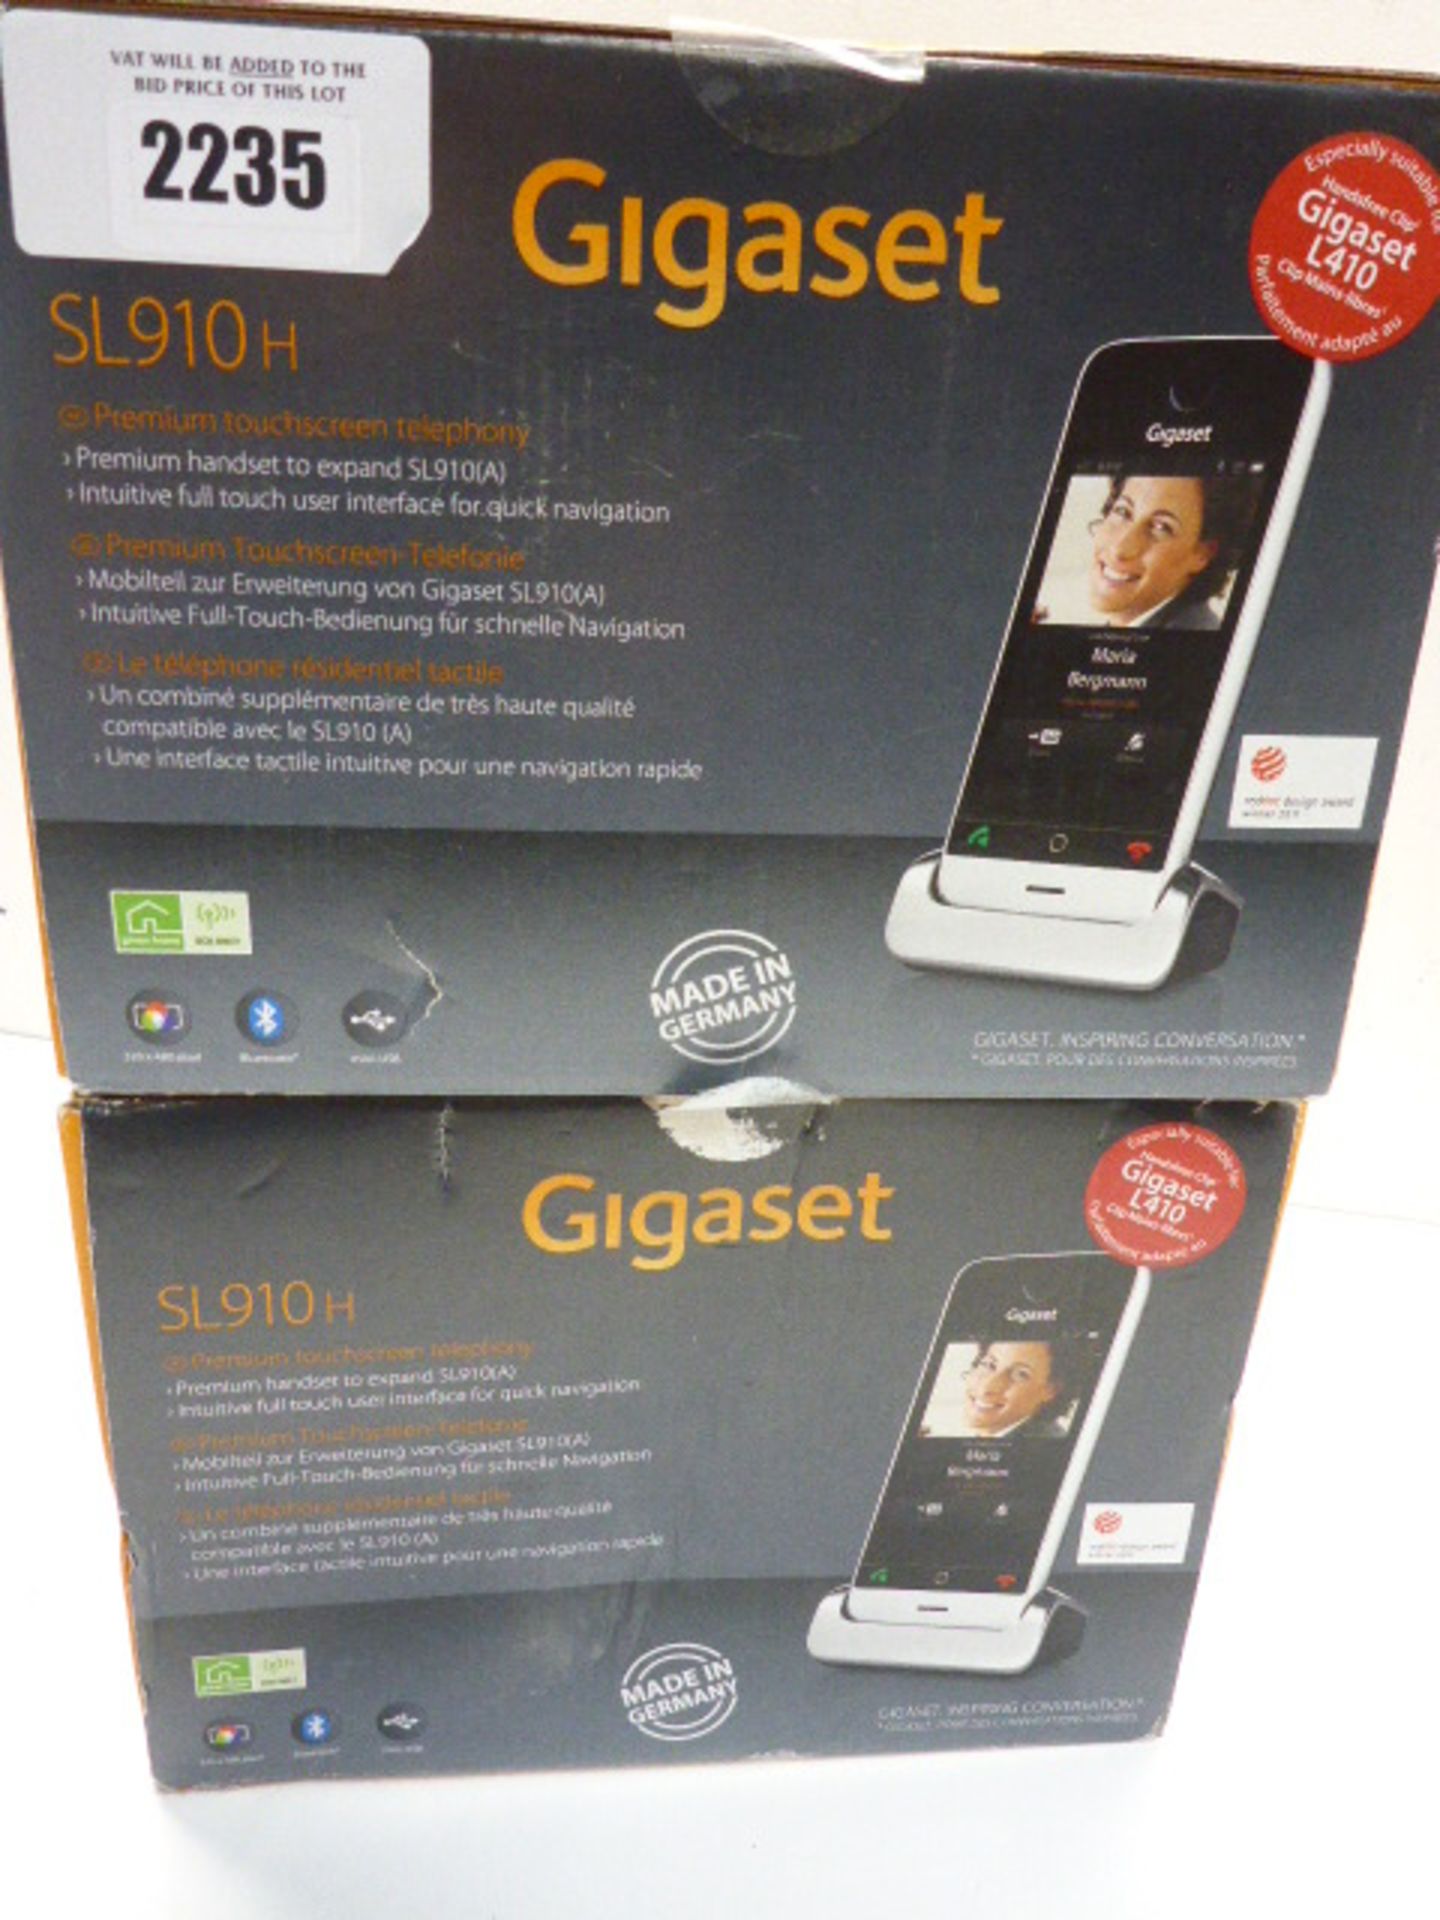 Two Gigaset SL910H phone handsets boxed.